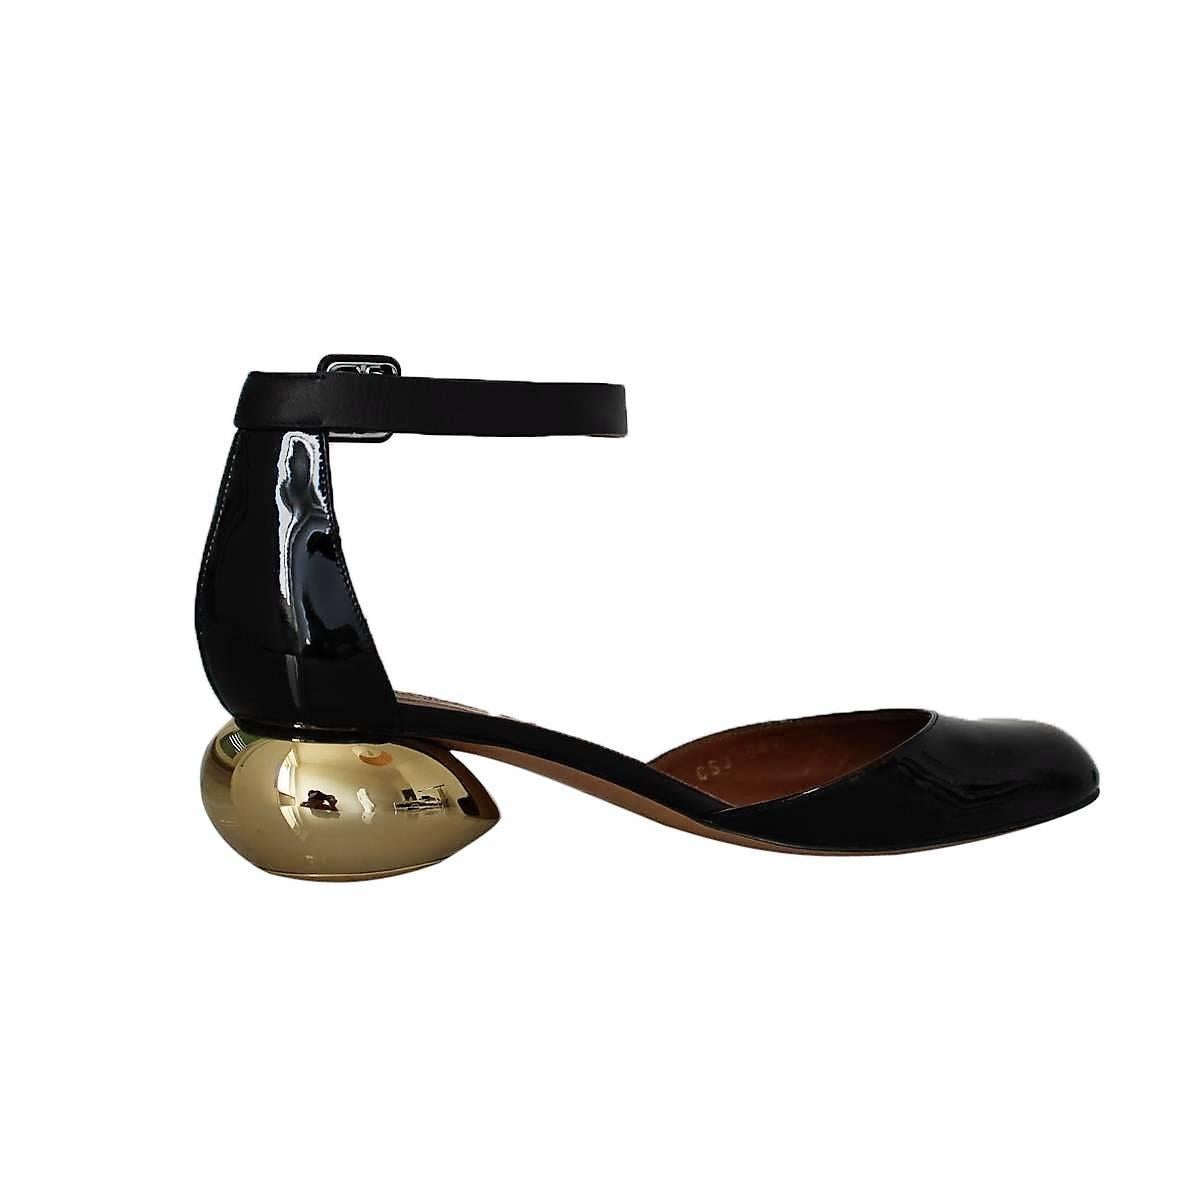 Amazing and ultra requested (and rare) Valentino Garavani shoed
Special edition
Patent leather
Black color
Sculpture golden heel
Ankle strap
Heel height cm 4 (1.57 inches)
Size 39
Made in Italy
Worldwide express shipping included in the